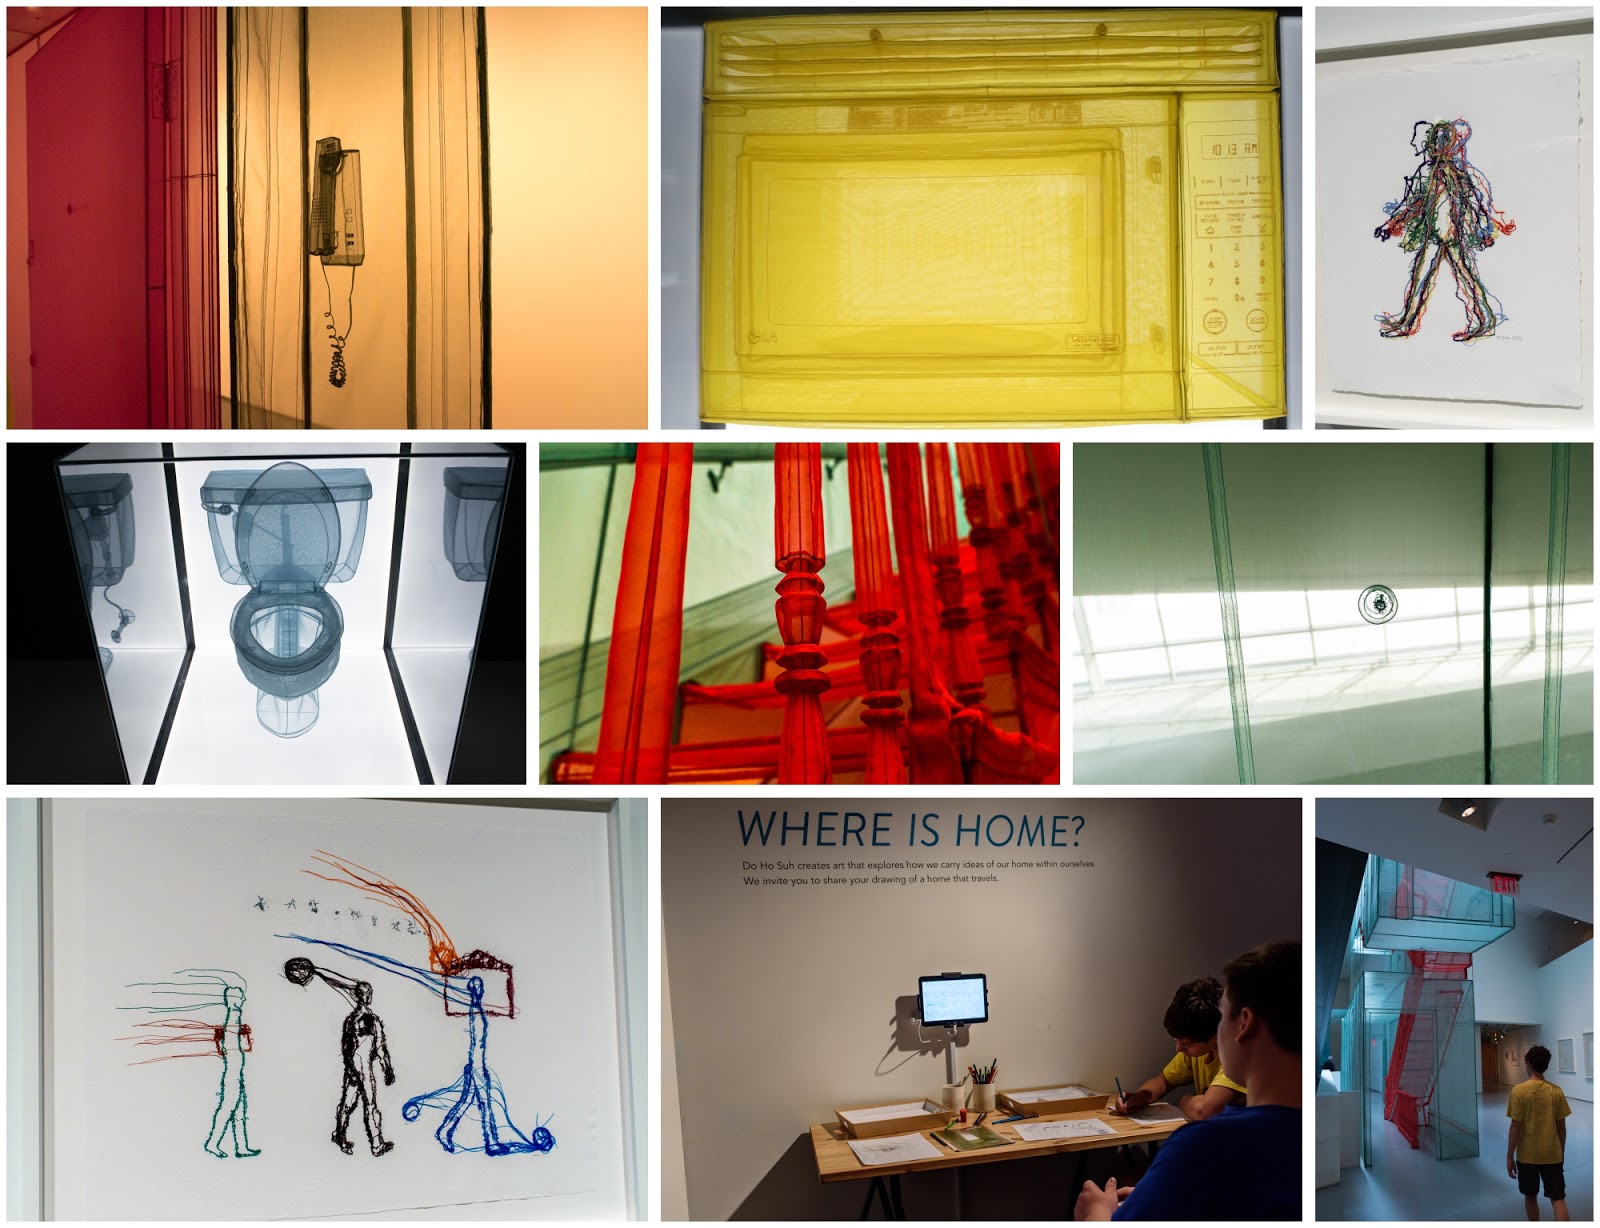 Collage of images from CAC Do Ho Suh exhibit (taken by Diana Sherblom)